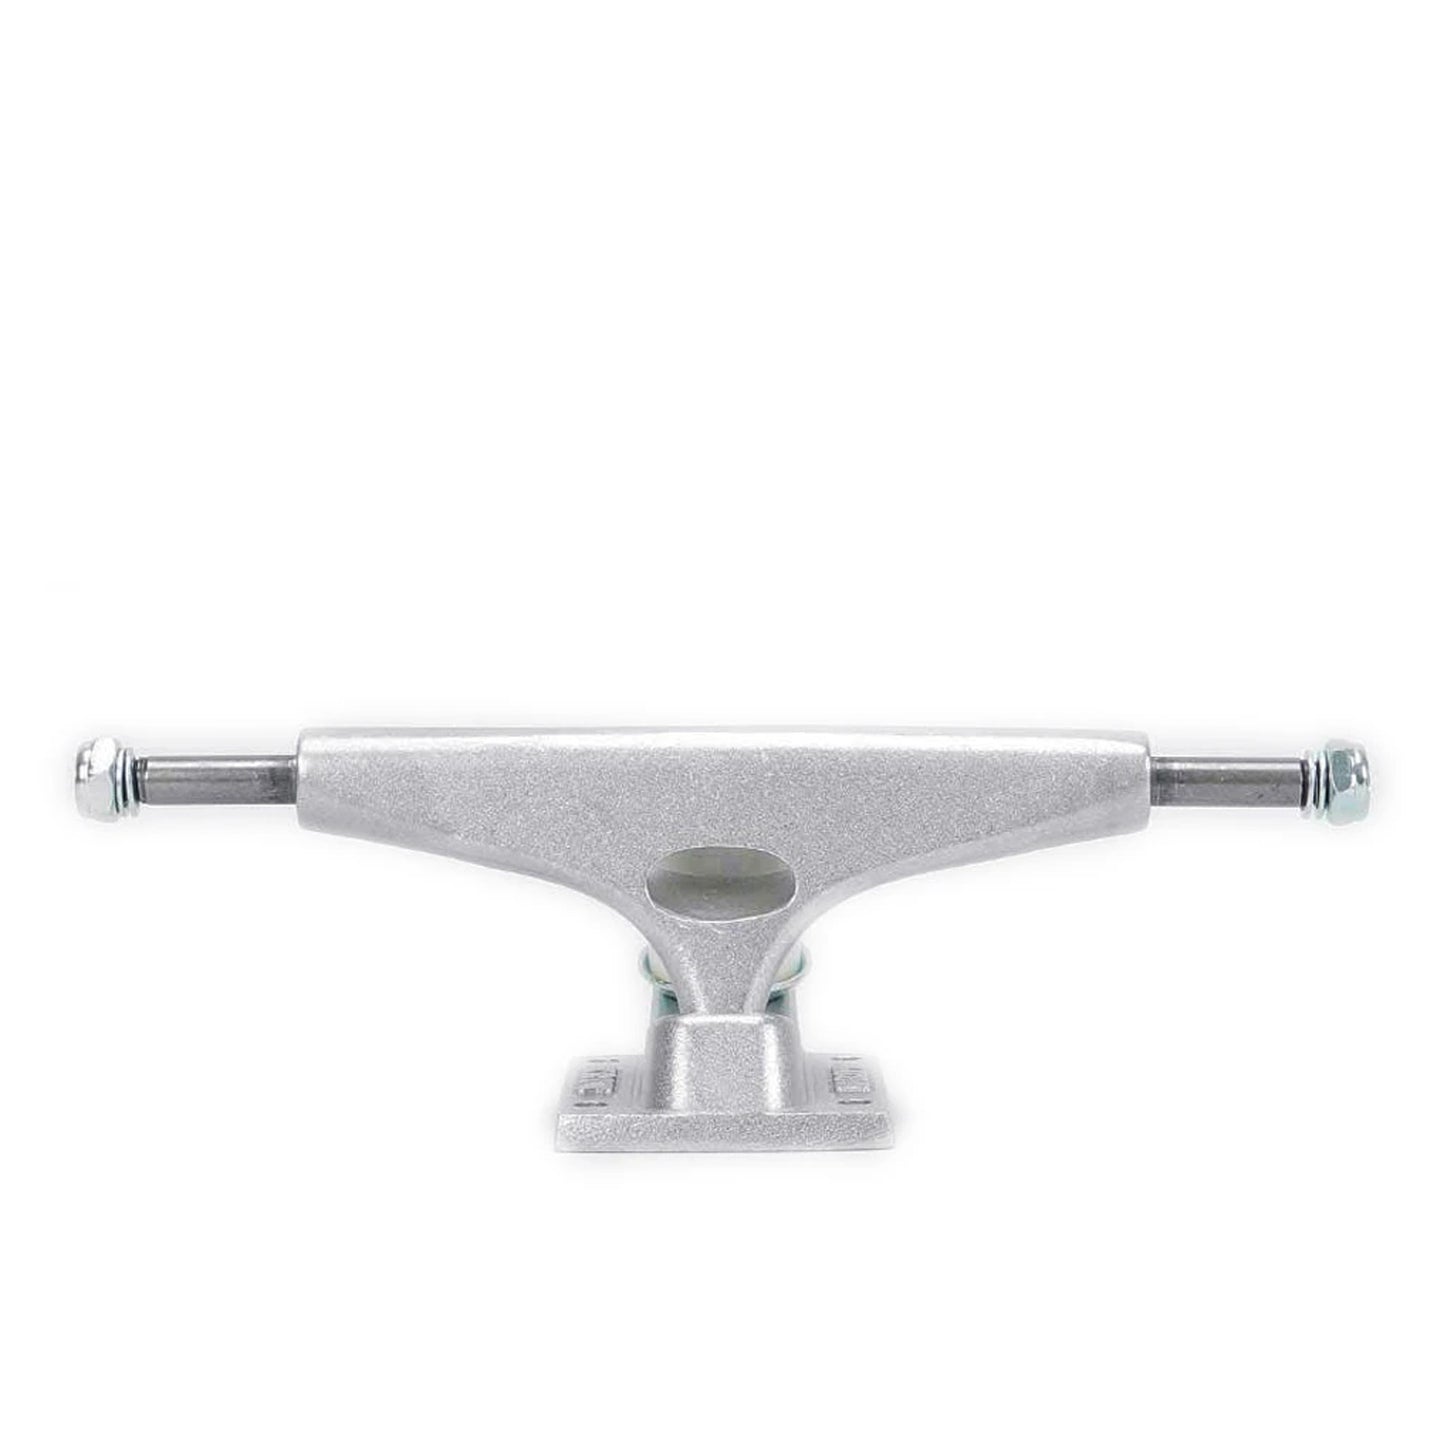 Krux Truck Silver (x 2 / Sold as a pair) - Prime Delux Store